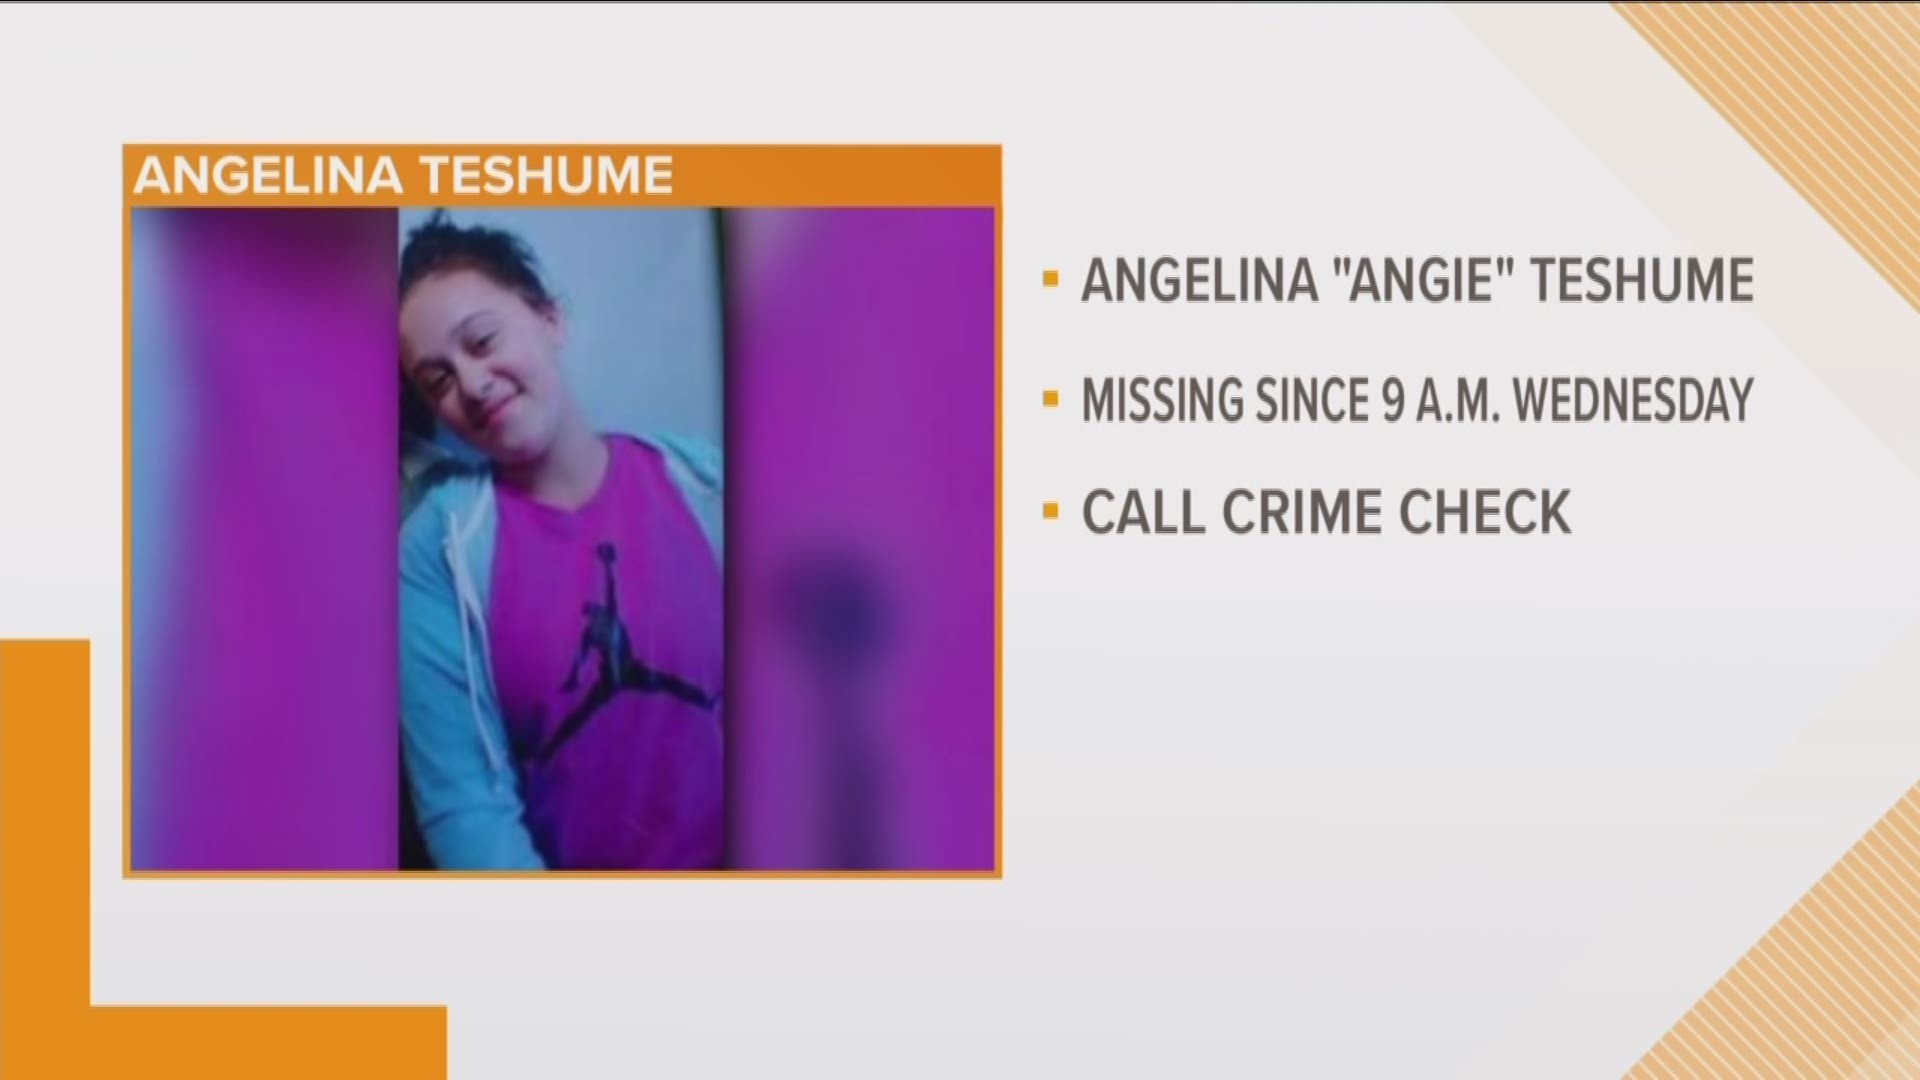 Police say that Angelina "Angie" Teshume, 13, has not been seen since she left for school at about 9 a.m. on Wednesday.